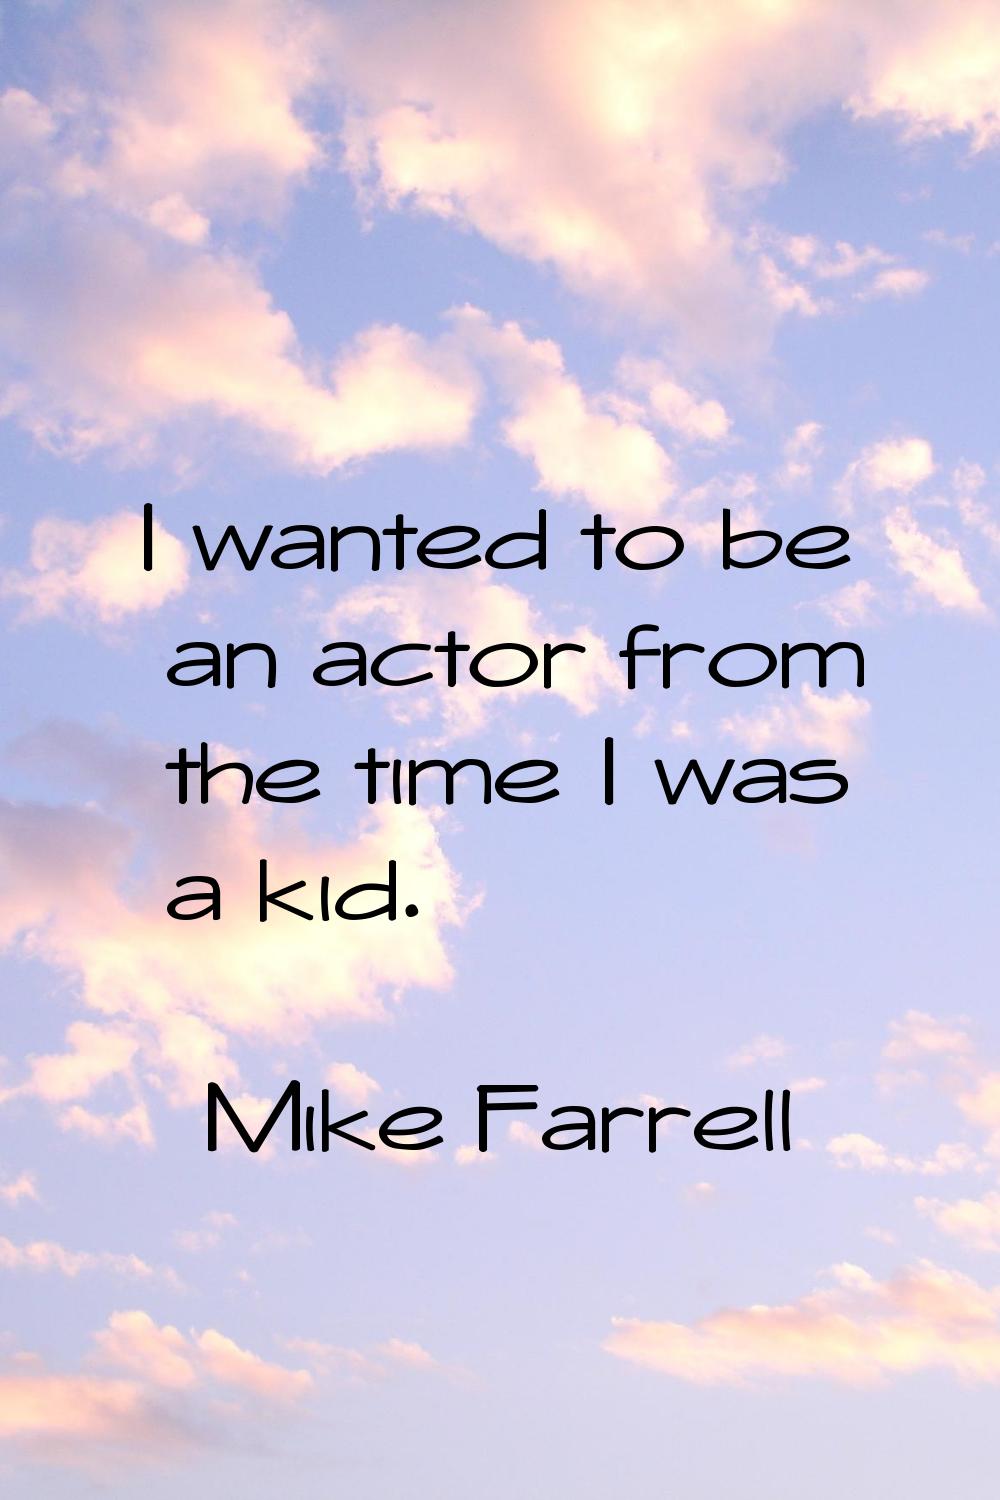 I wanted to be an actor from the time I was a kid.